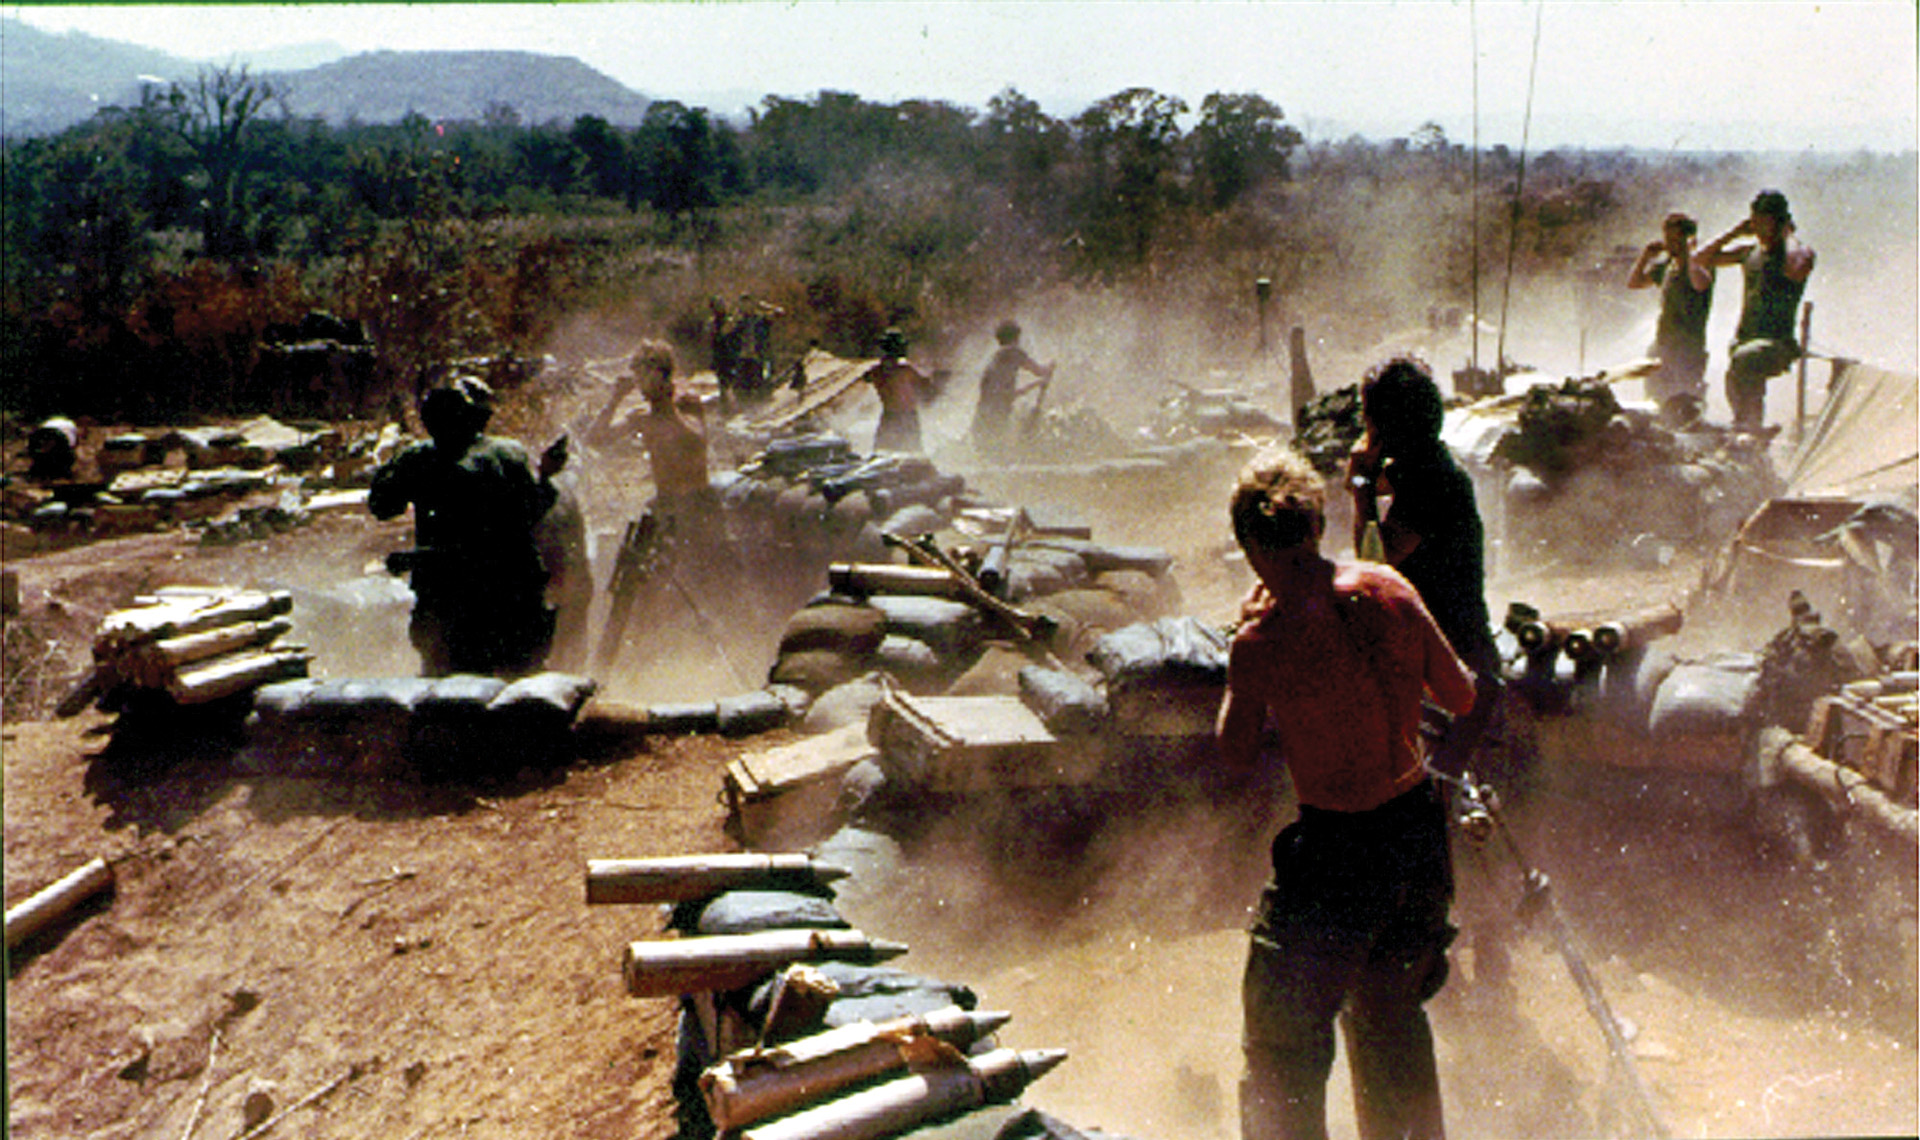 U.S. artillerymen near the Laotian border fire mortars into Laos in support of the advancing South Vietnamese. American helicopter units supplied the South Vietnamese throughout the operation. 